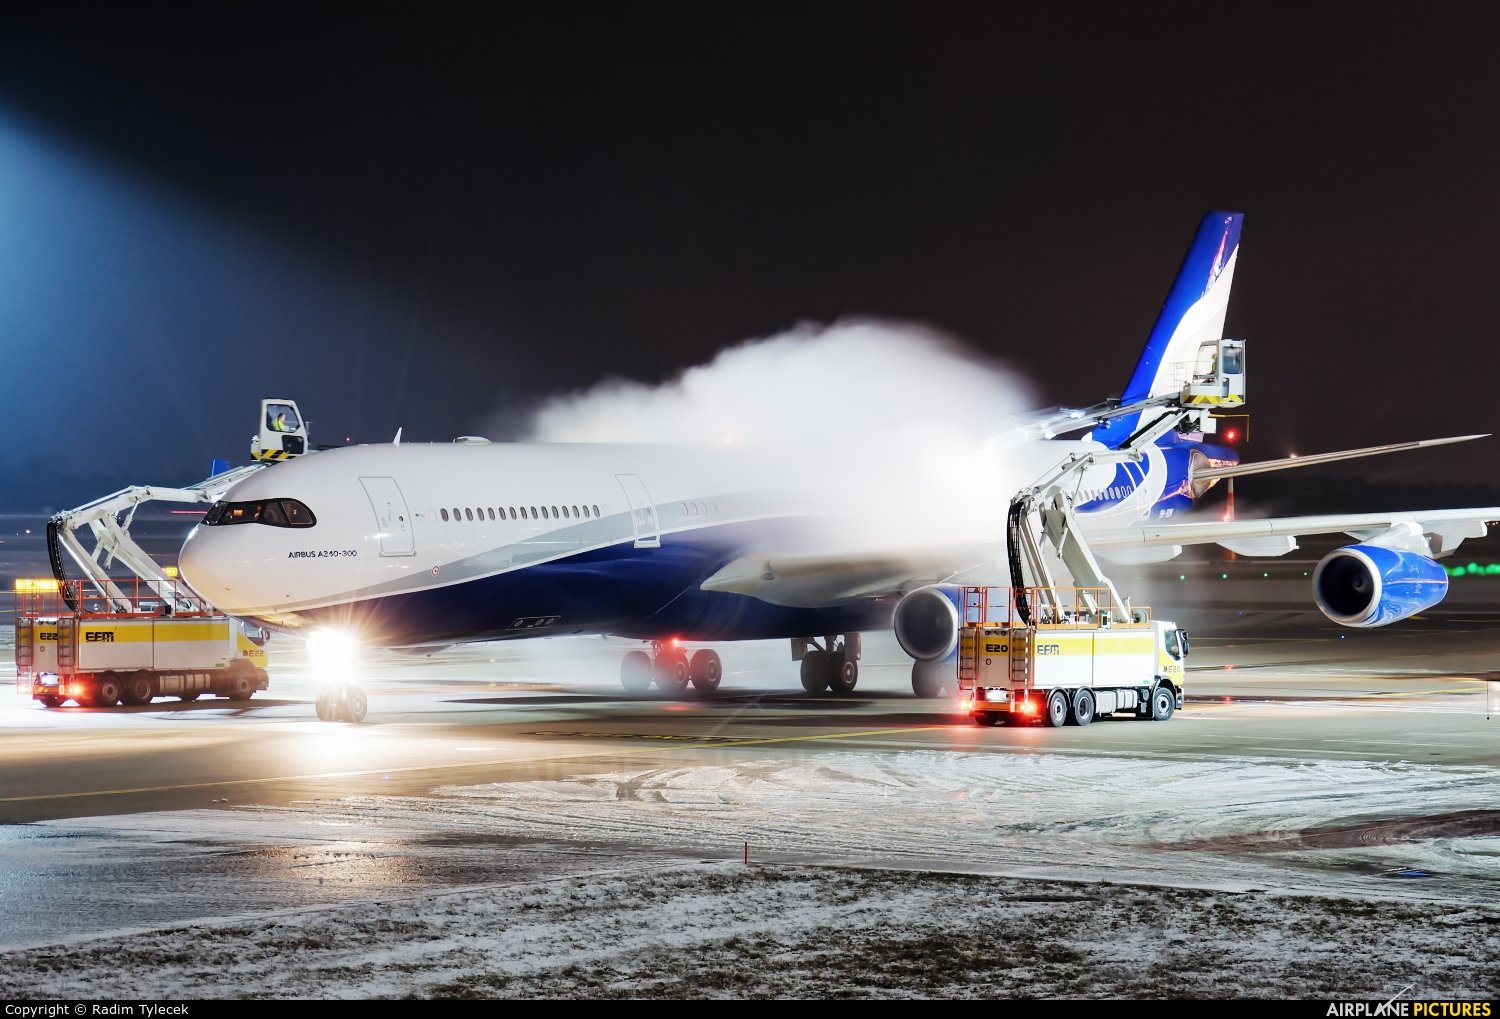 Get Ready for Aircraft De-Icing Season: Explore Our Top Training Courses